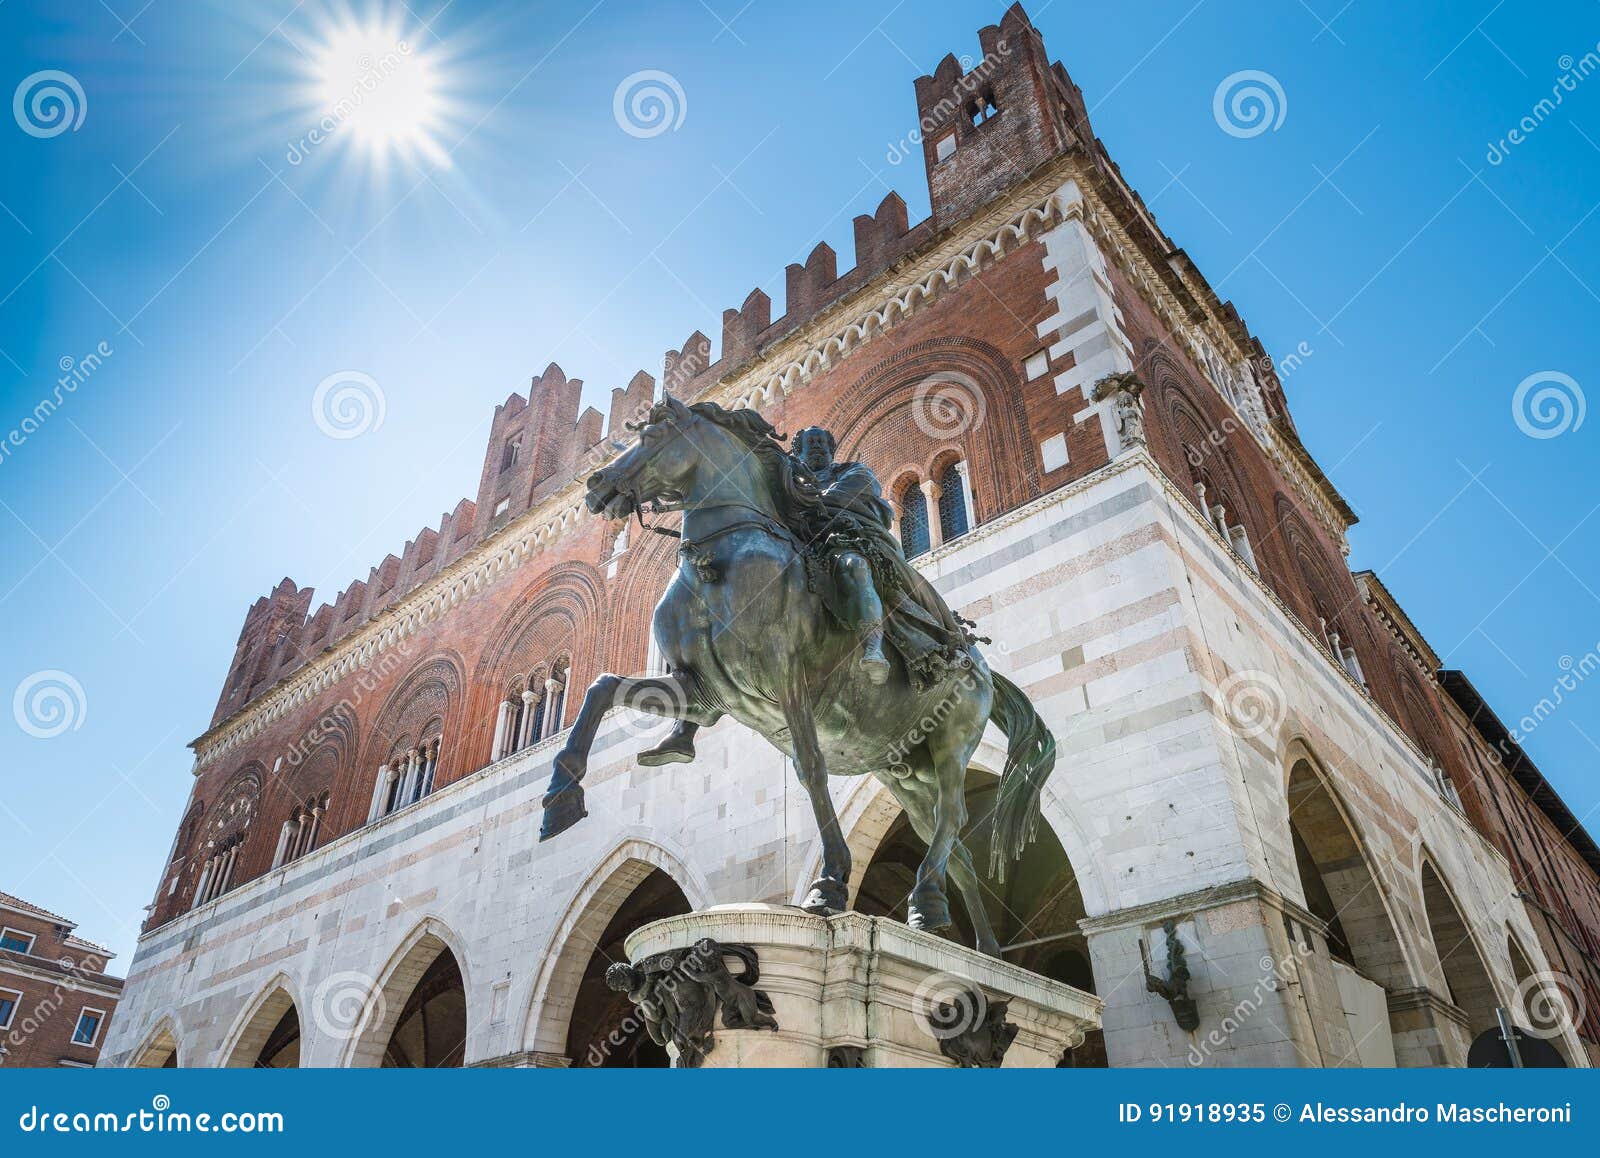 piacenza, medieval town, italy. piazza cavalli, equestrian monument and palazzo gotico in the city center